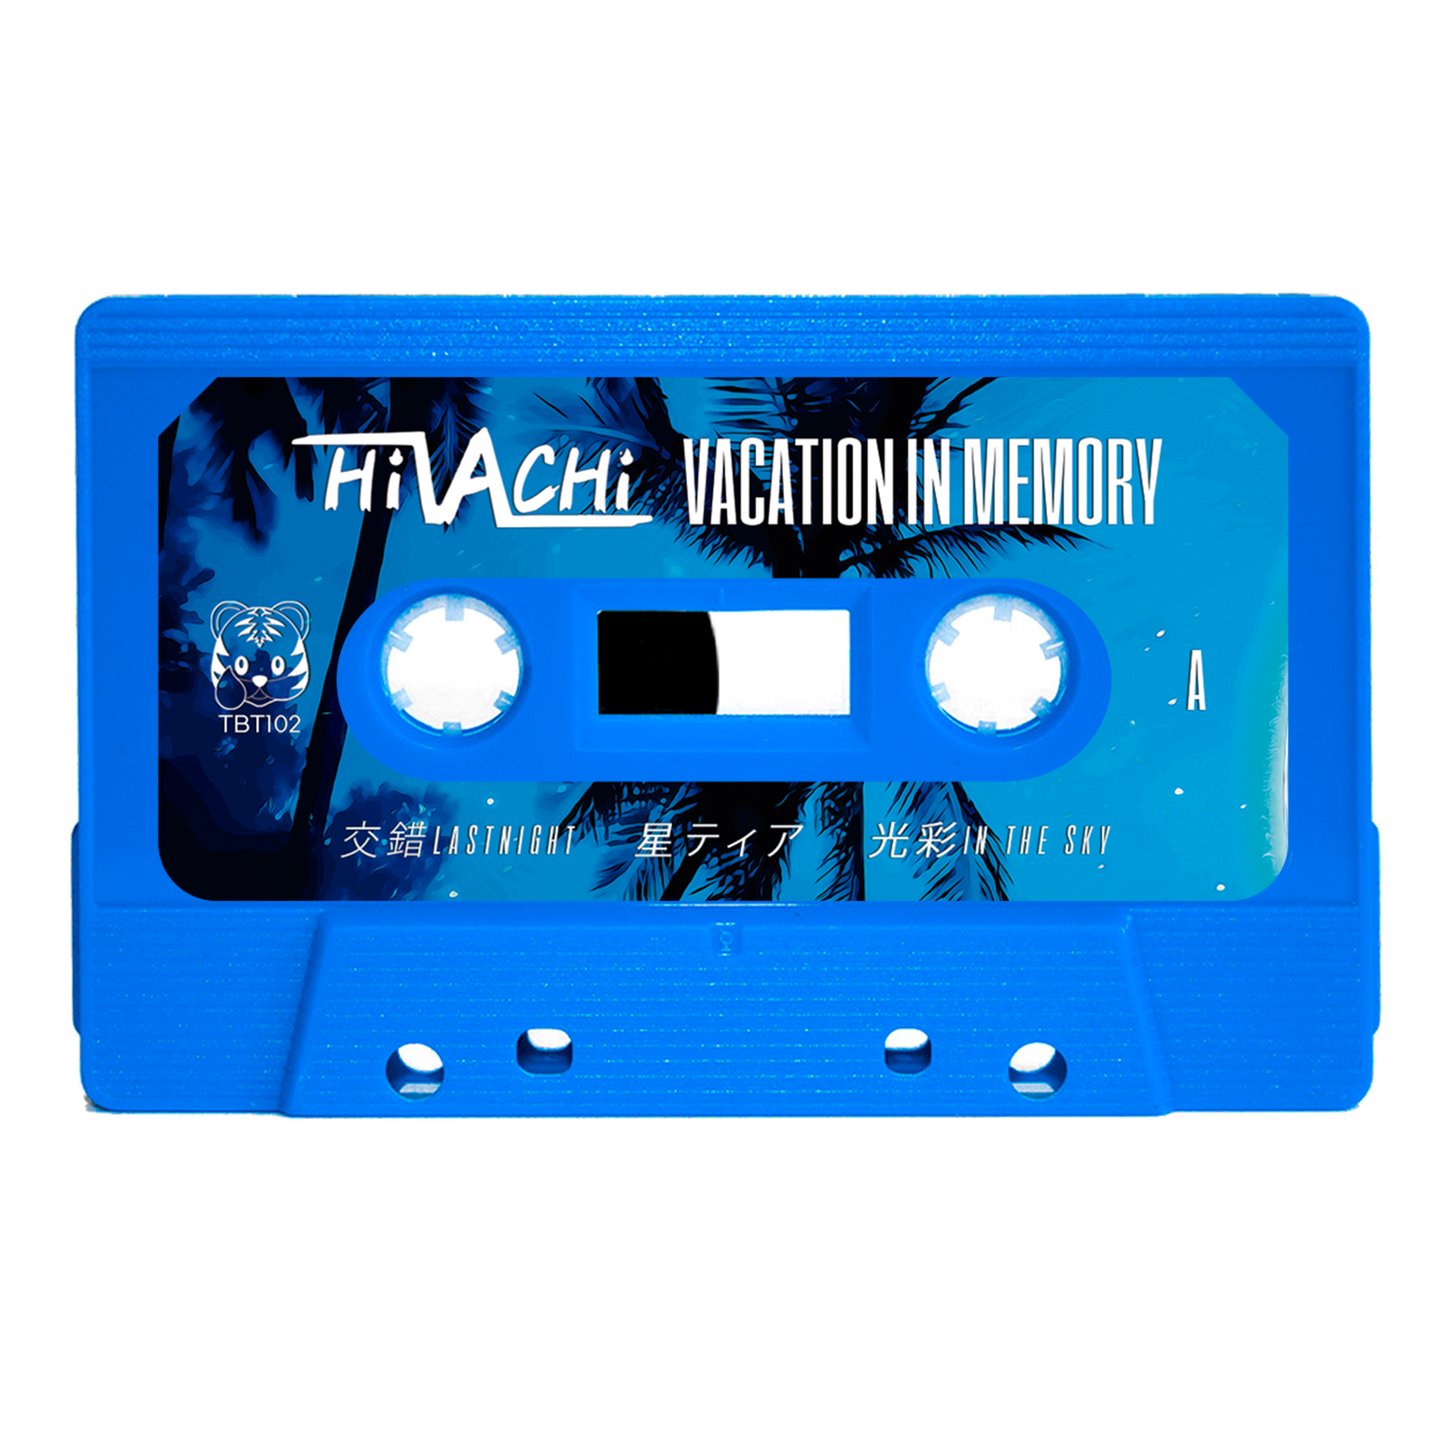 HiVACHi - "Vacation in Memory" Limited Edition Cassette Tape